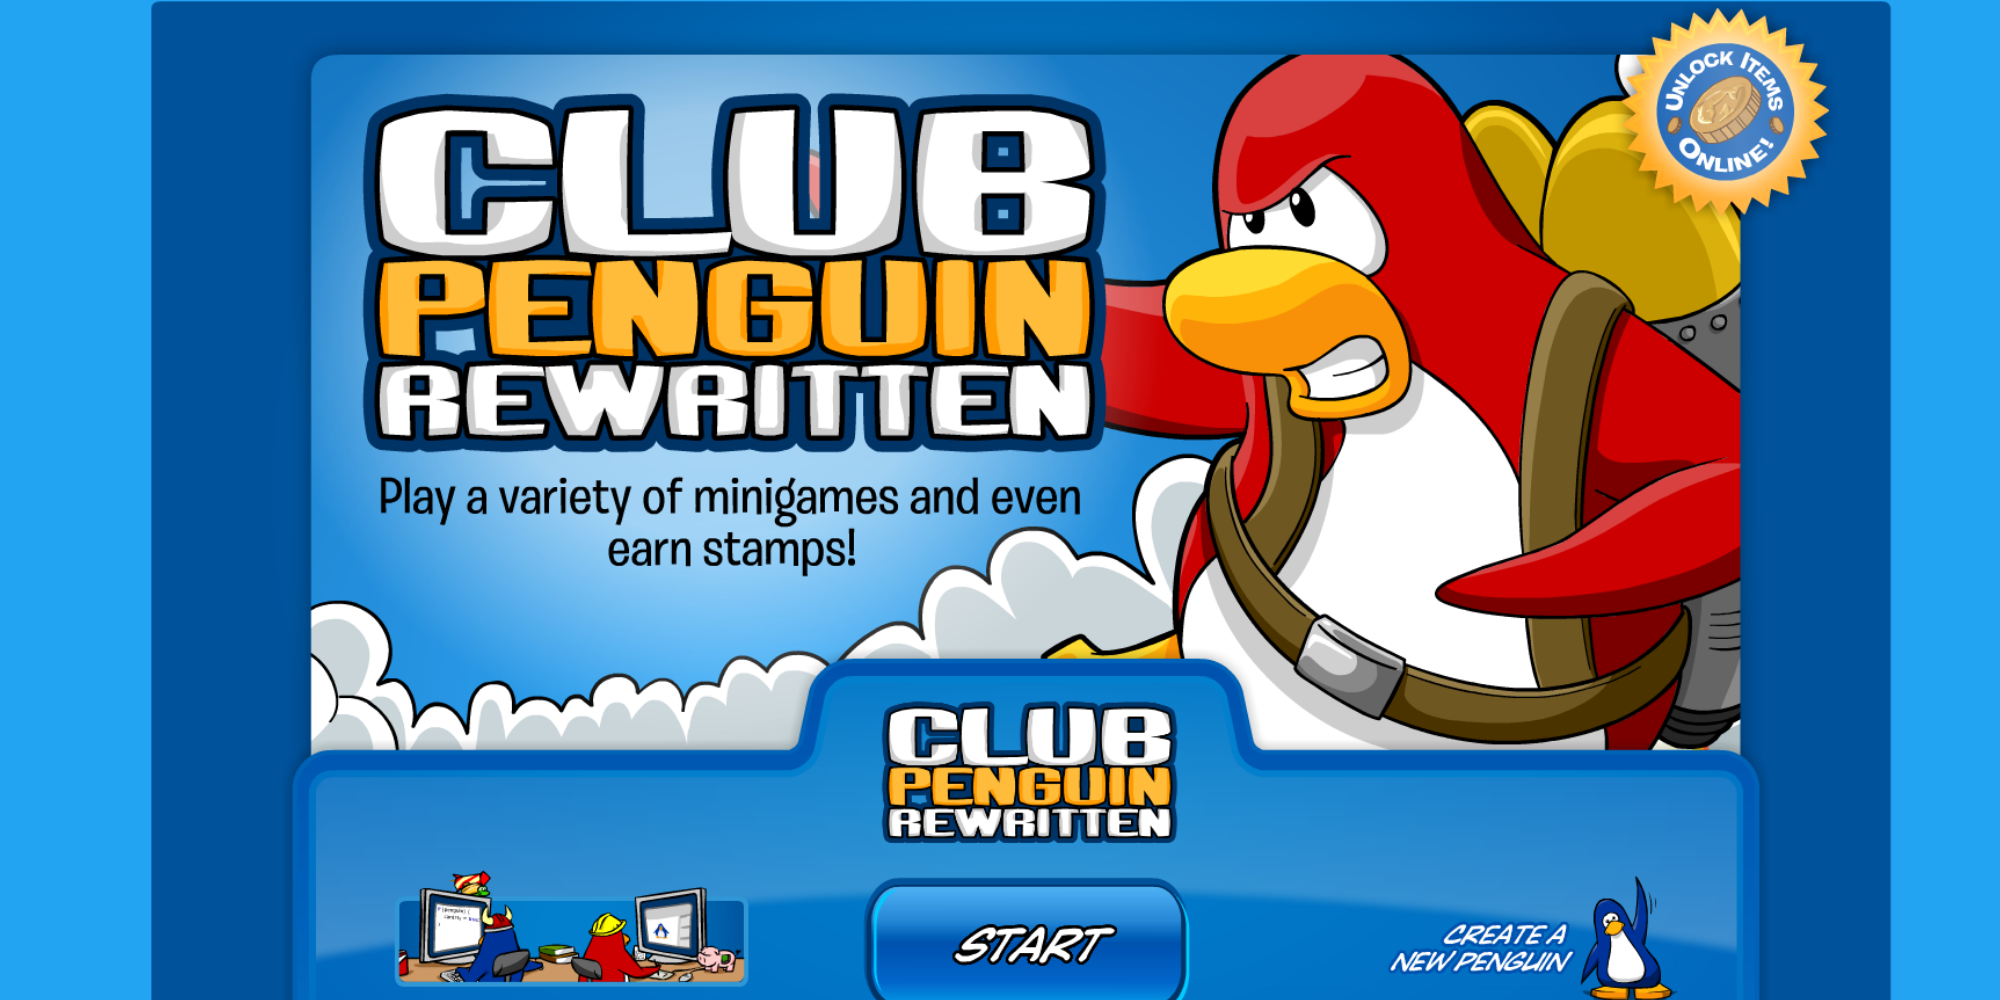 Disney shuts down Club Penguin copy over abusive messages and e